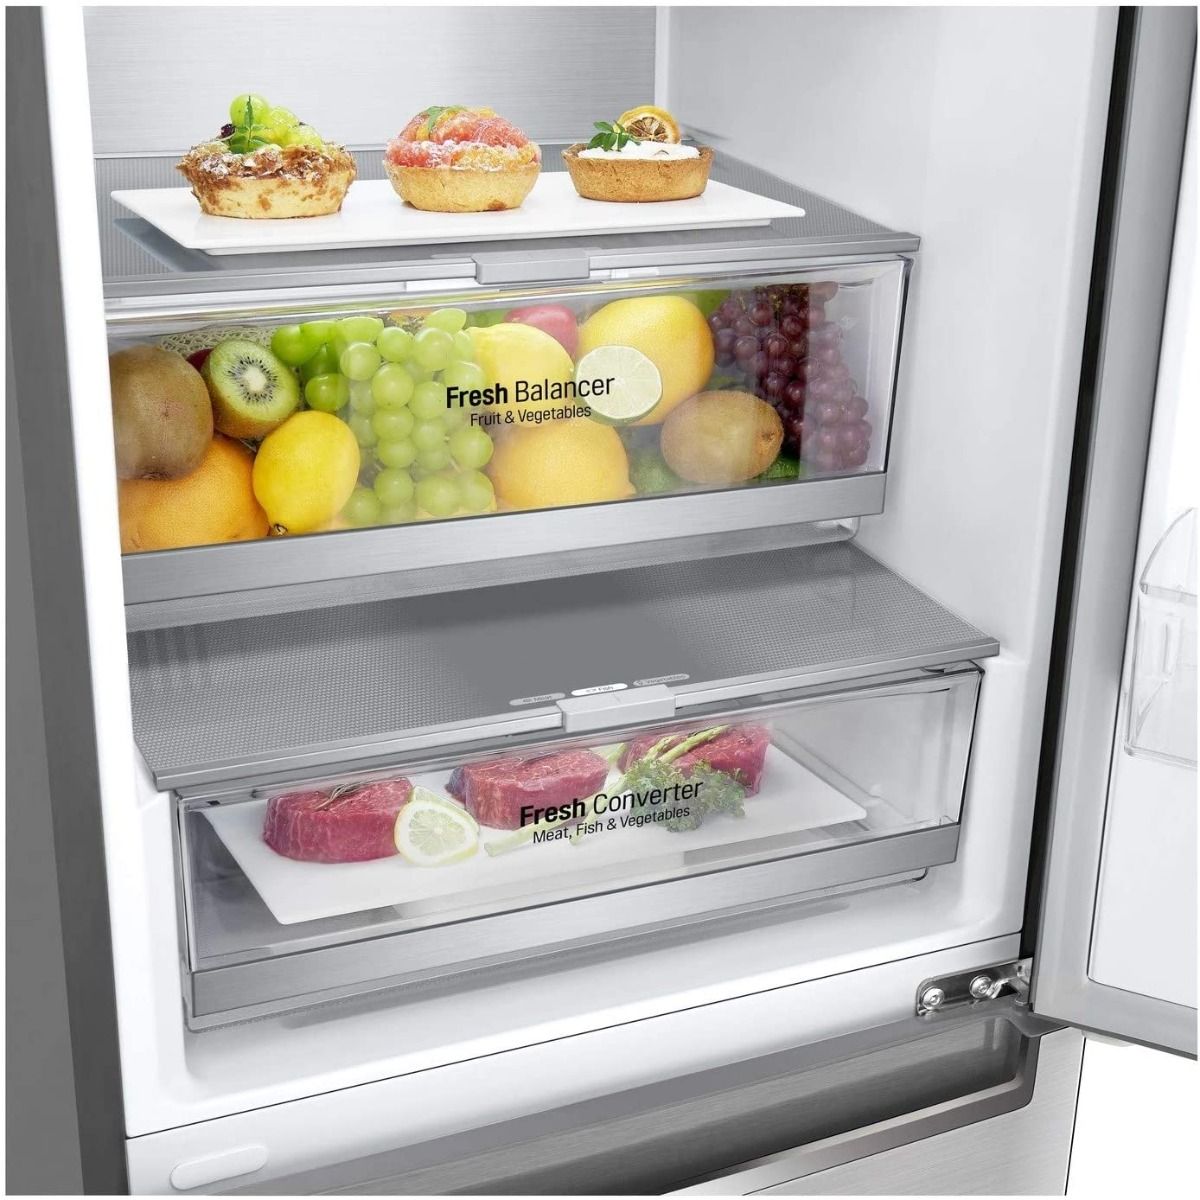 LG GBB92STAXP 60Cm Frost Free Fridge Freezer – Stainless Steel at ...